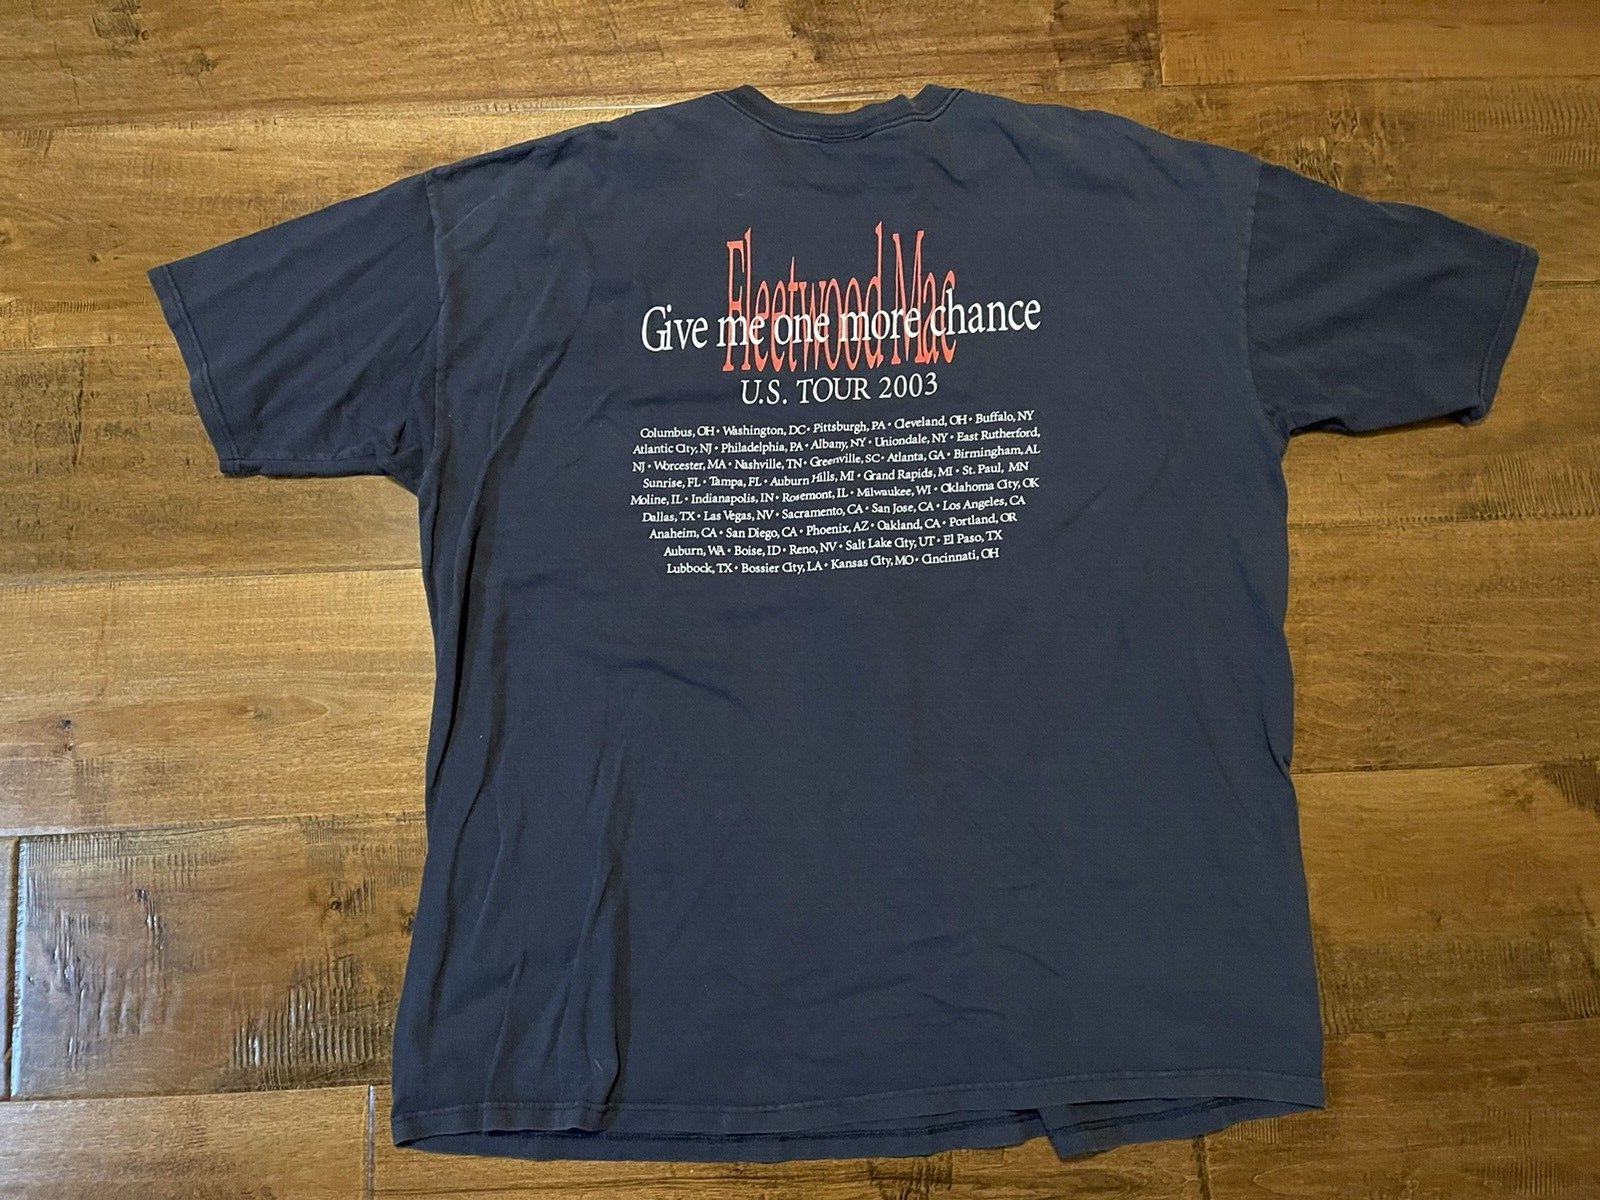 Fleetwood Mac 2003 U.S. Tour Say You Will Give Me One More Chance T-Shirt - 3XL